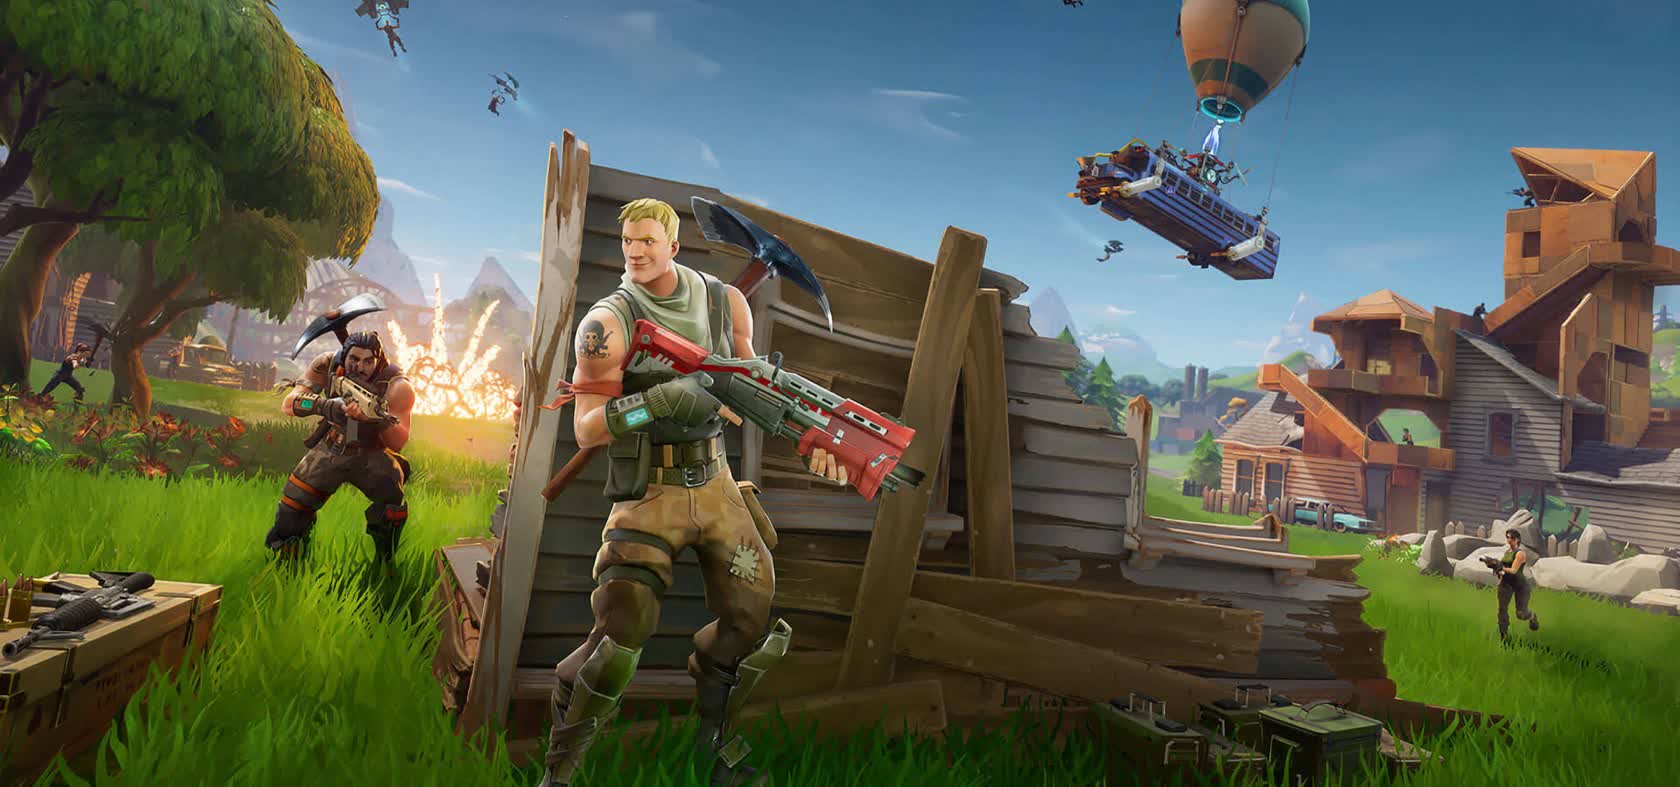 Epic shaves off 60GB from Fortnite's PC file size through new optimizations